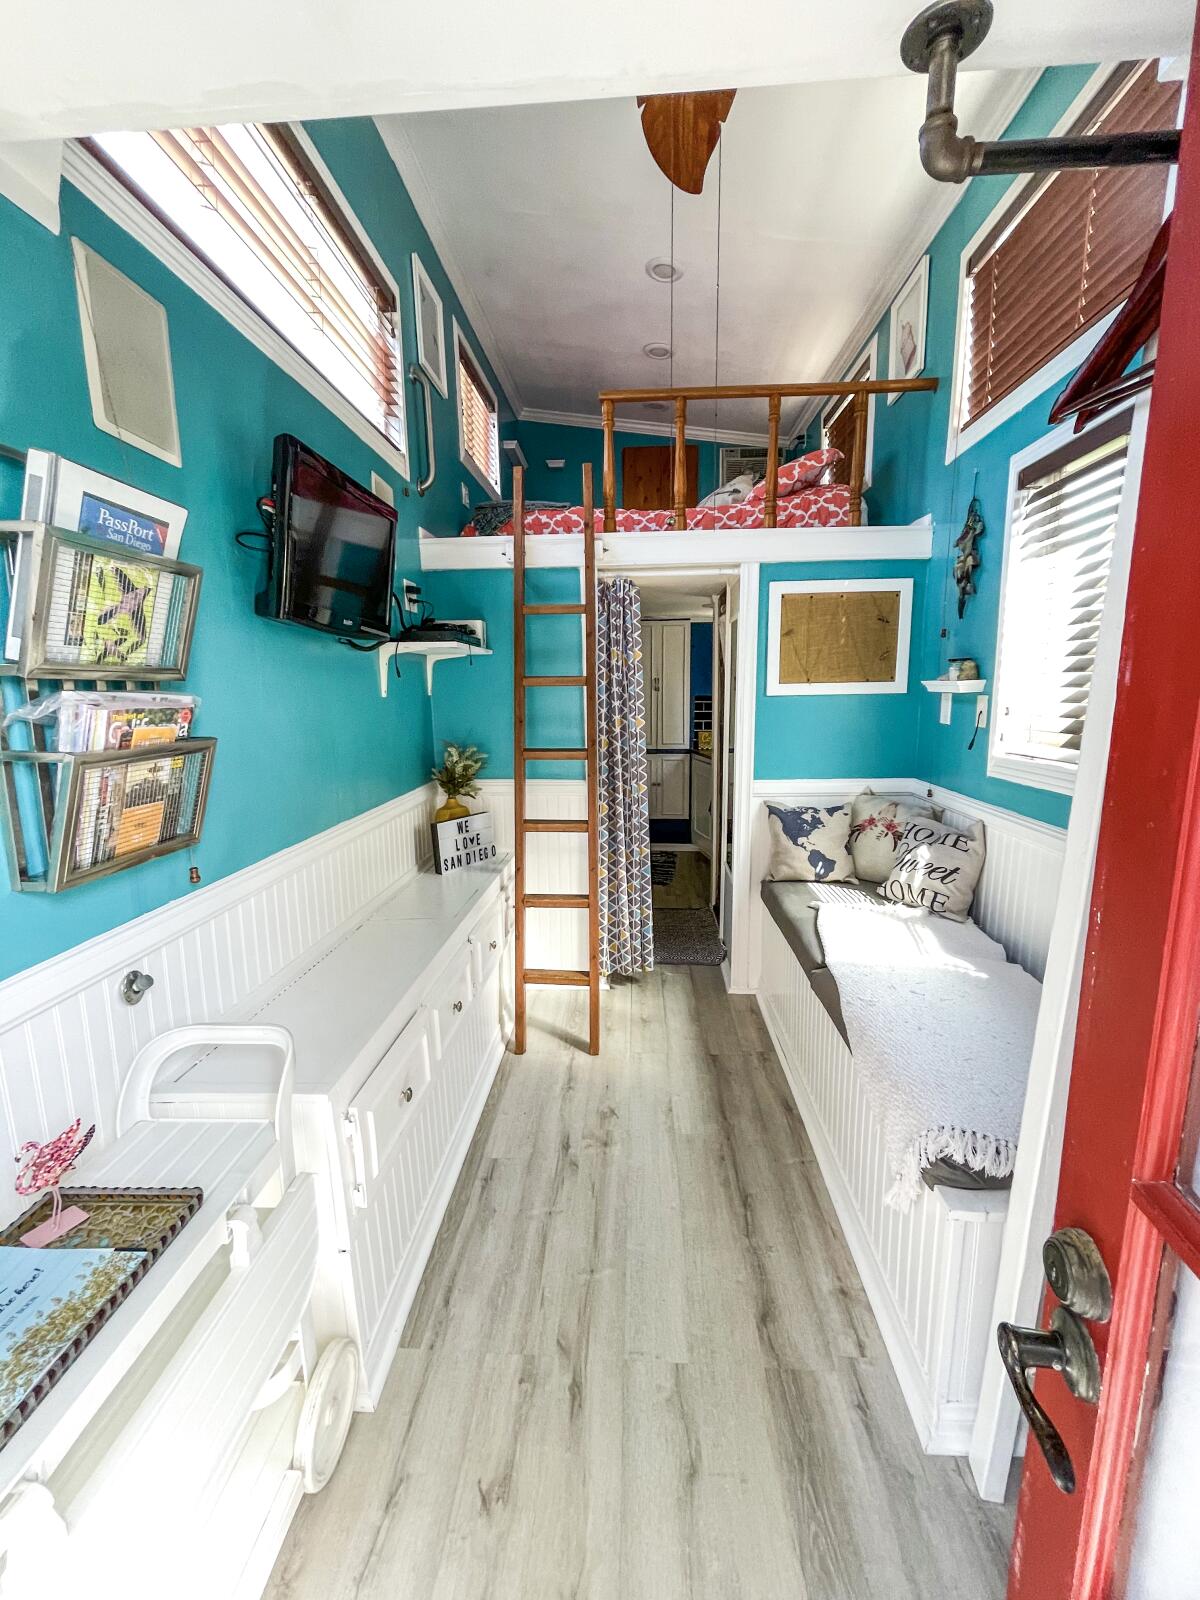 The interior of a tiny house looking up at a sleeping loft